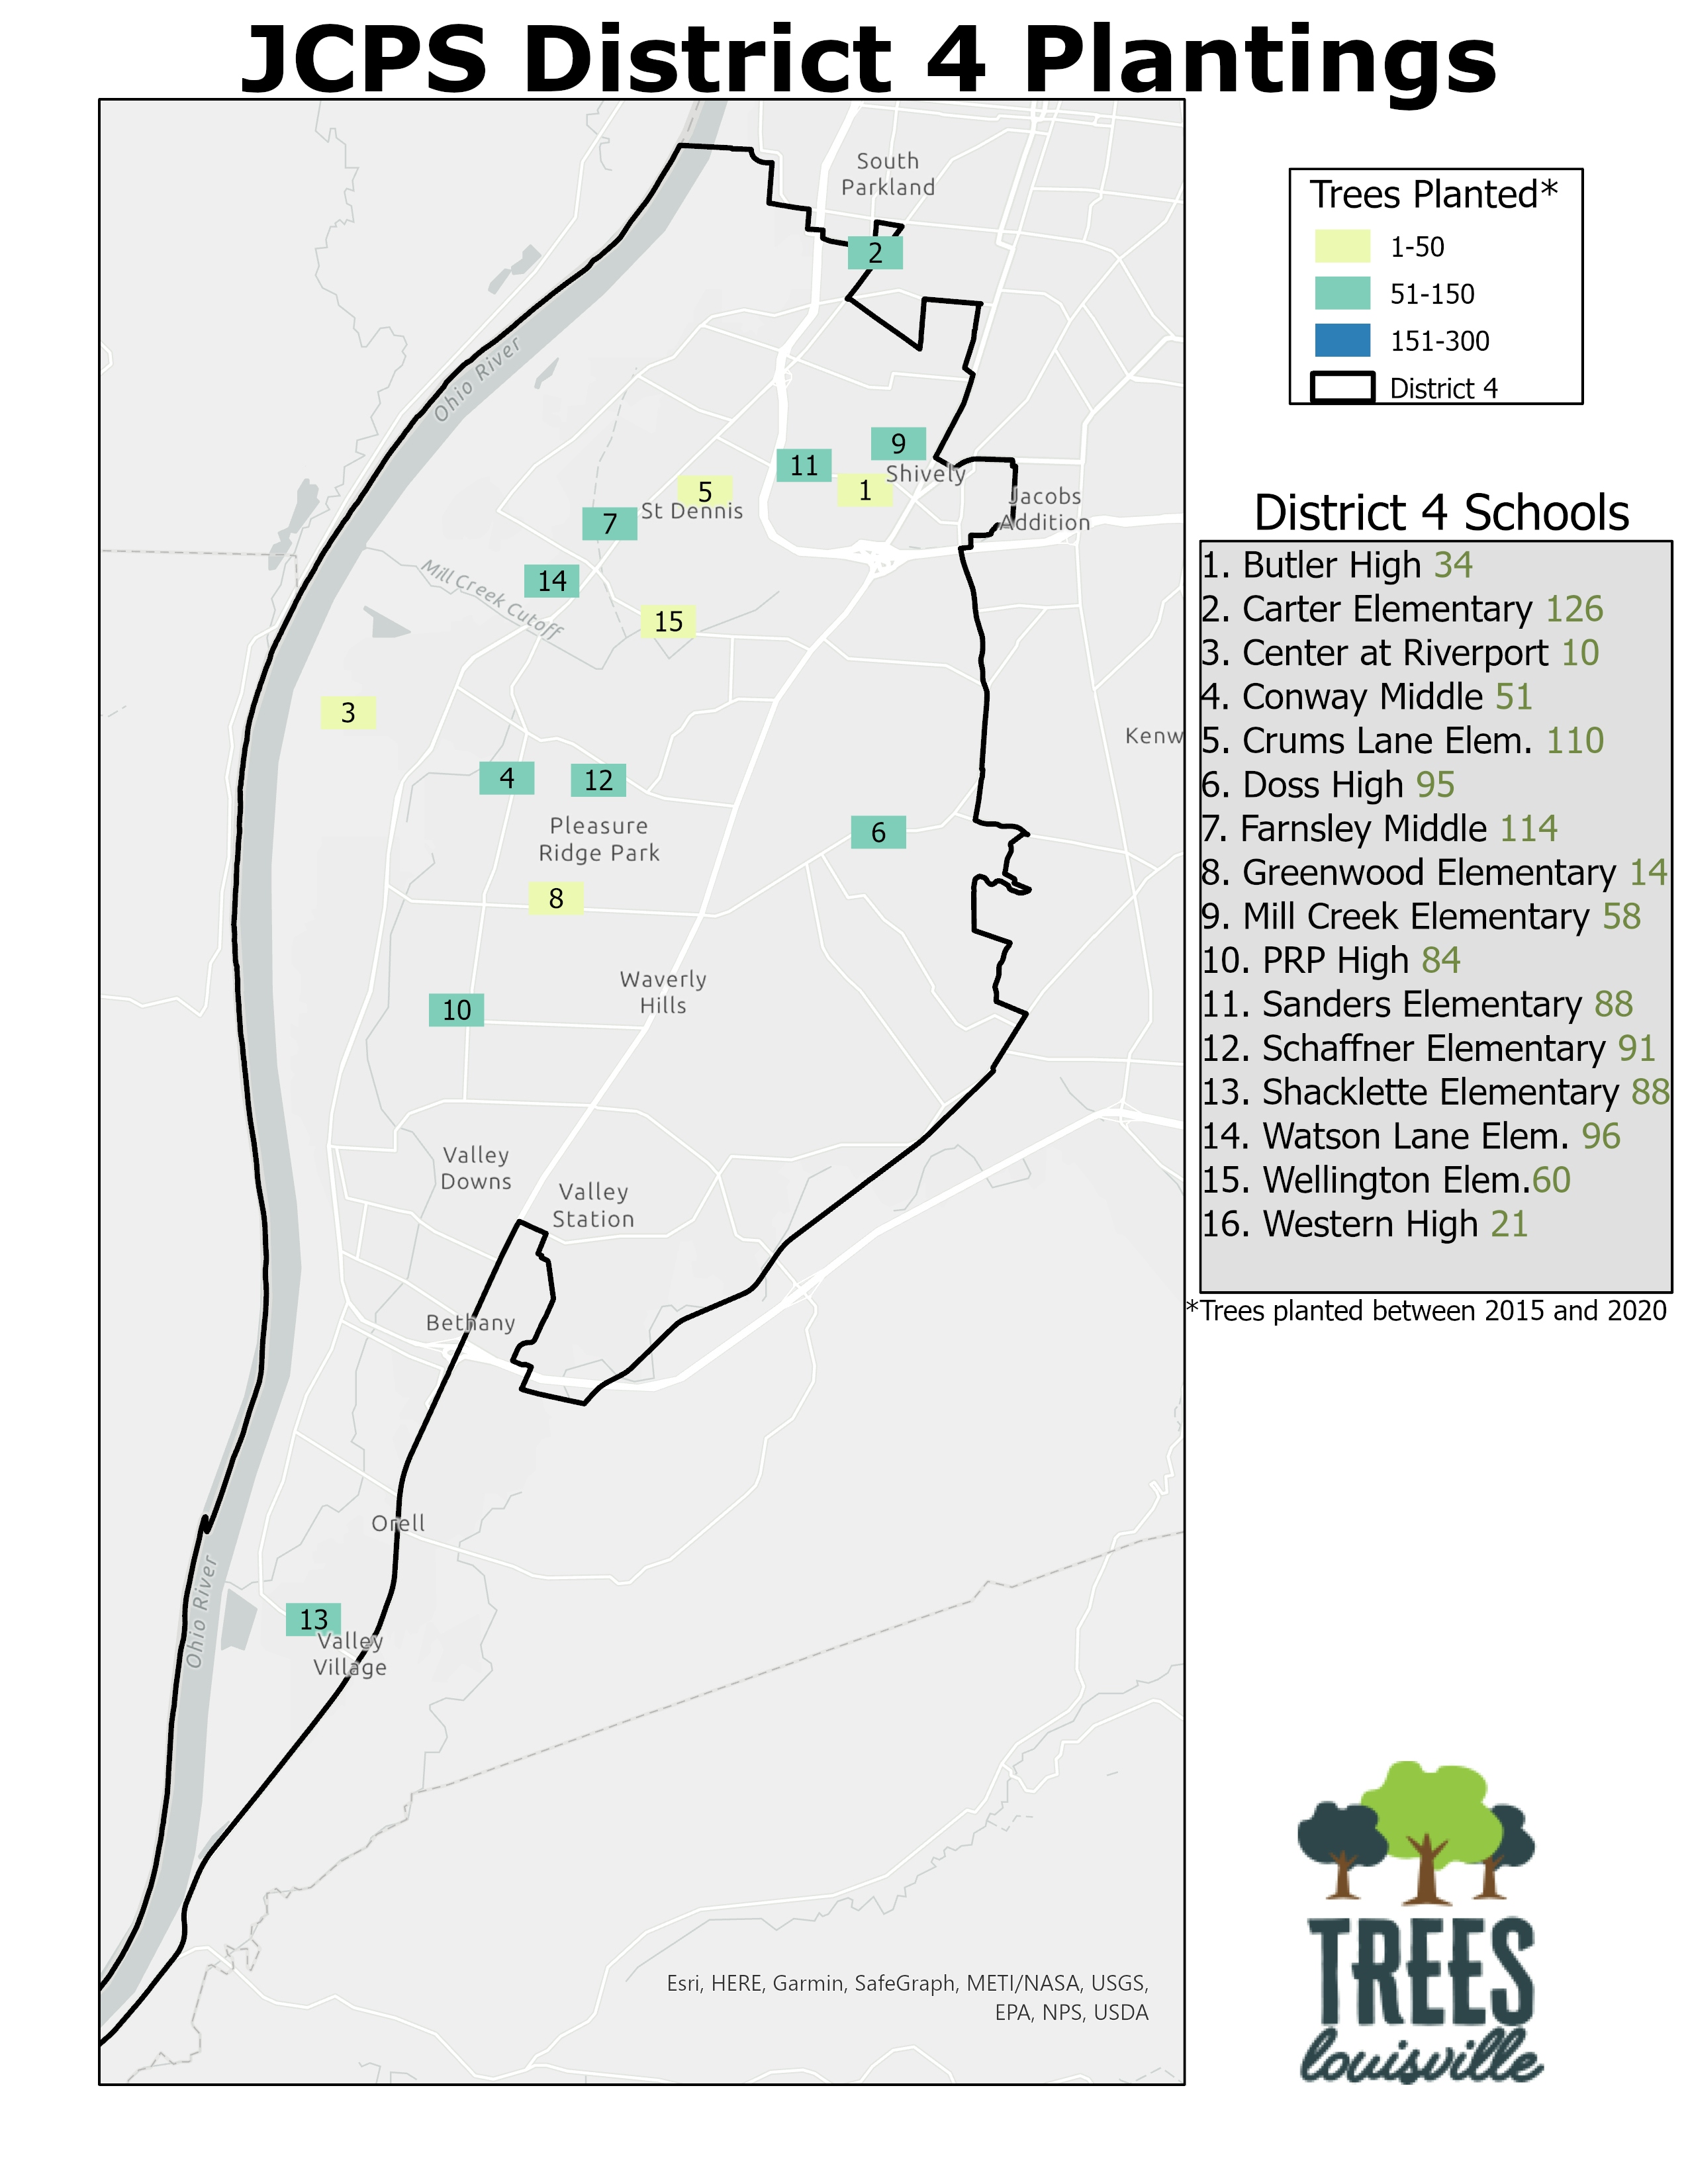 JCPS District 4 Tree Plantings